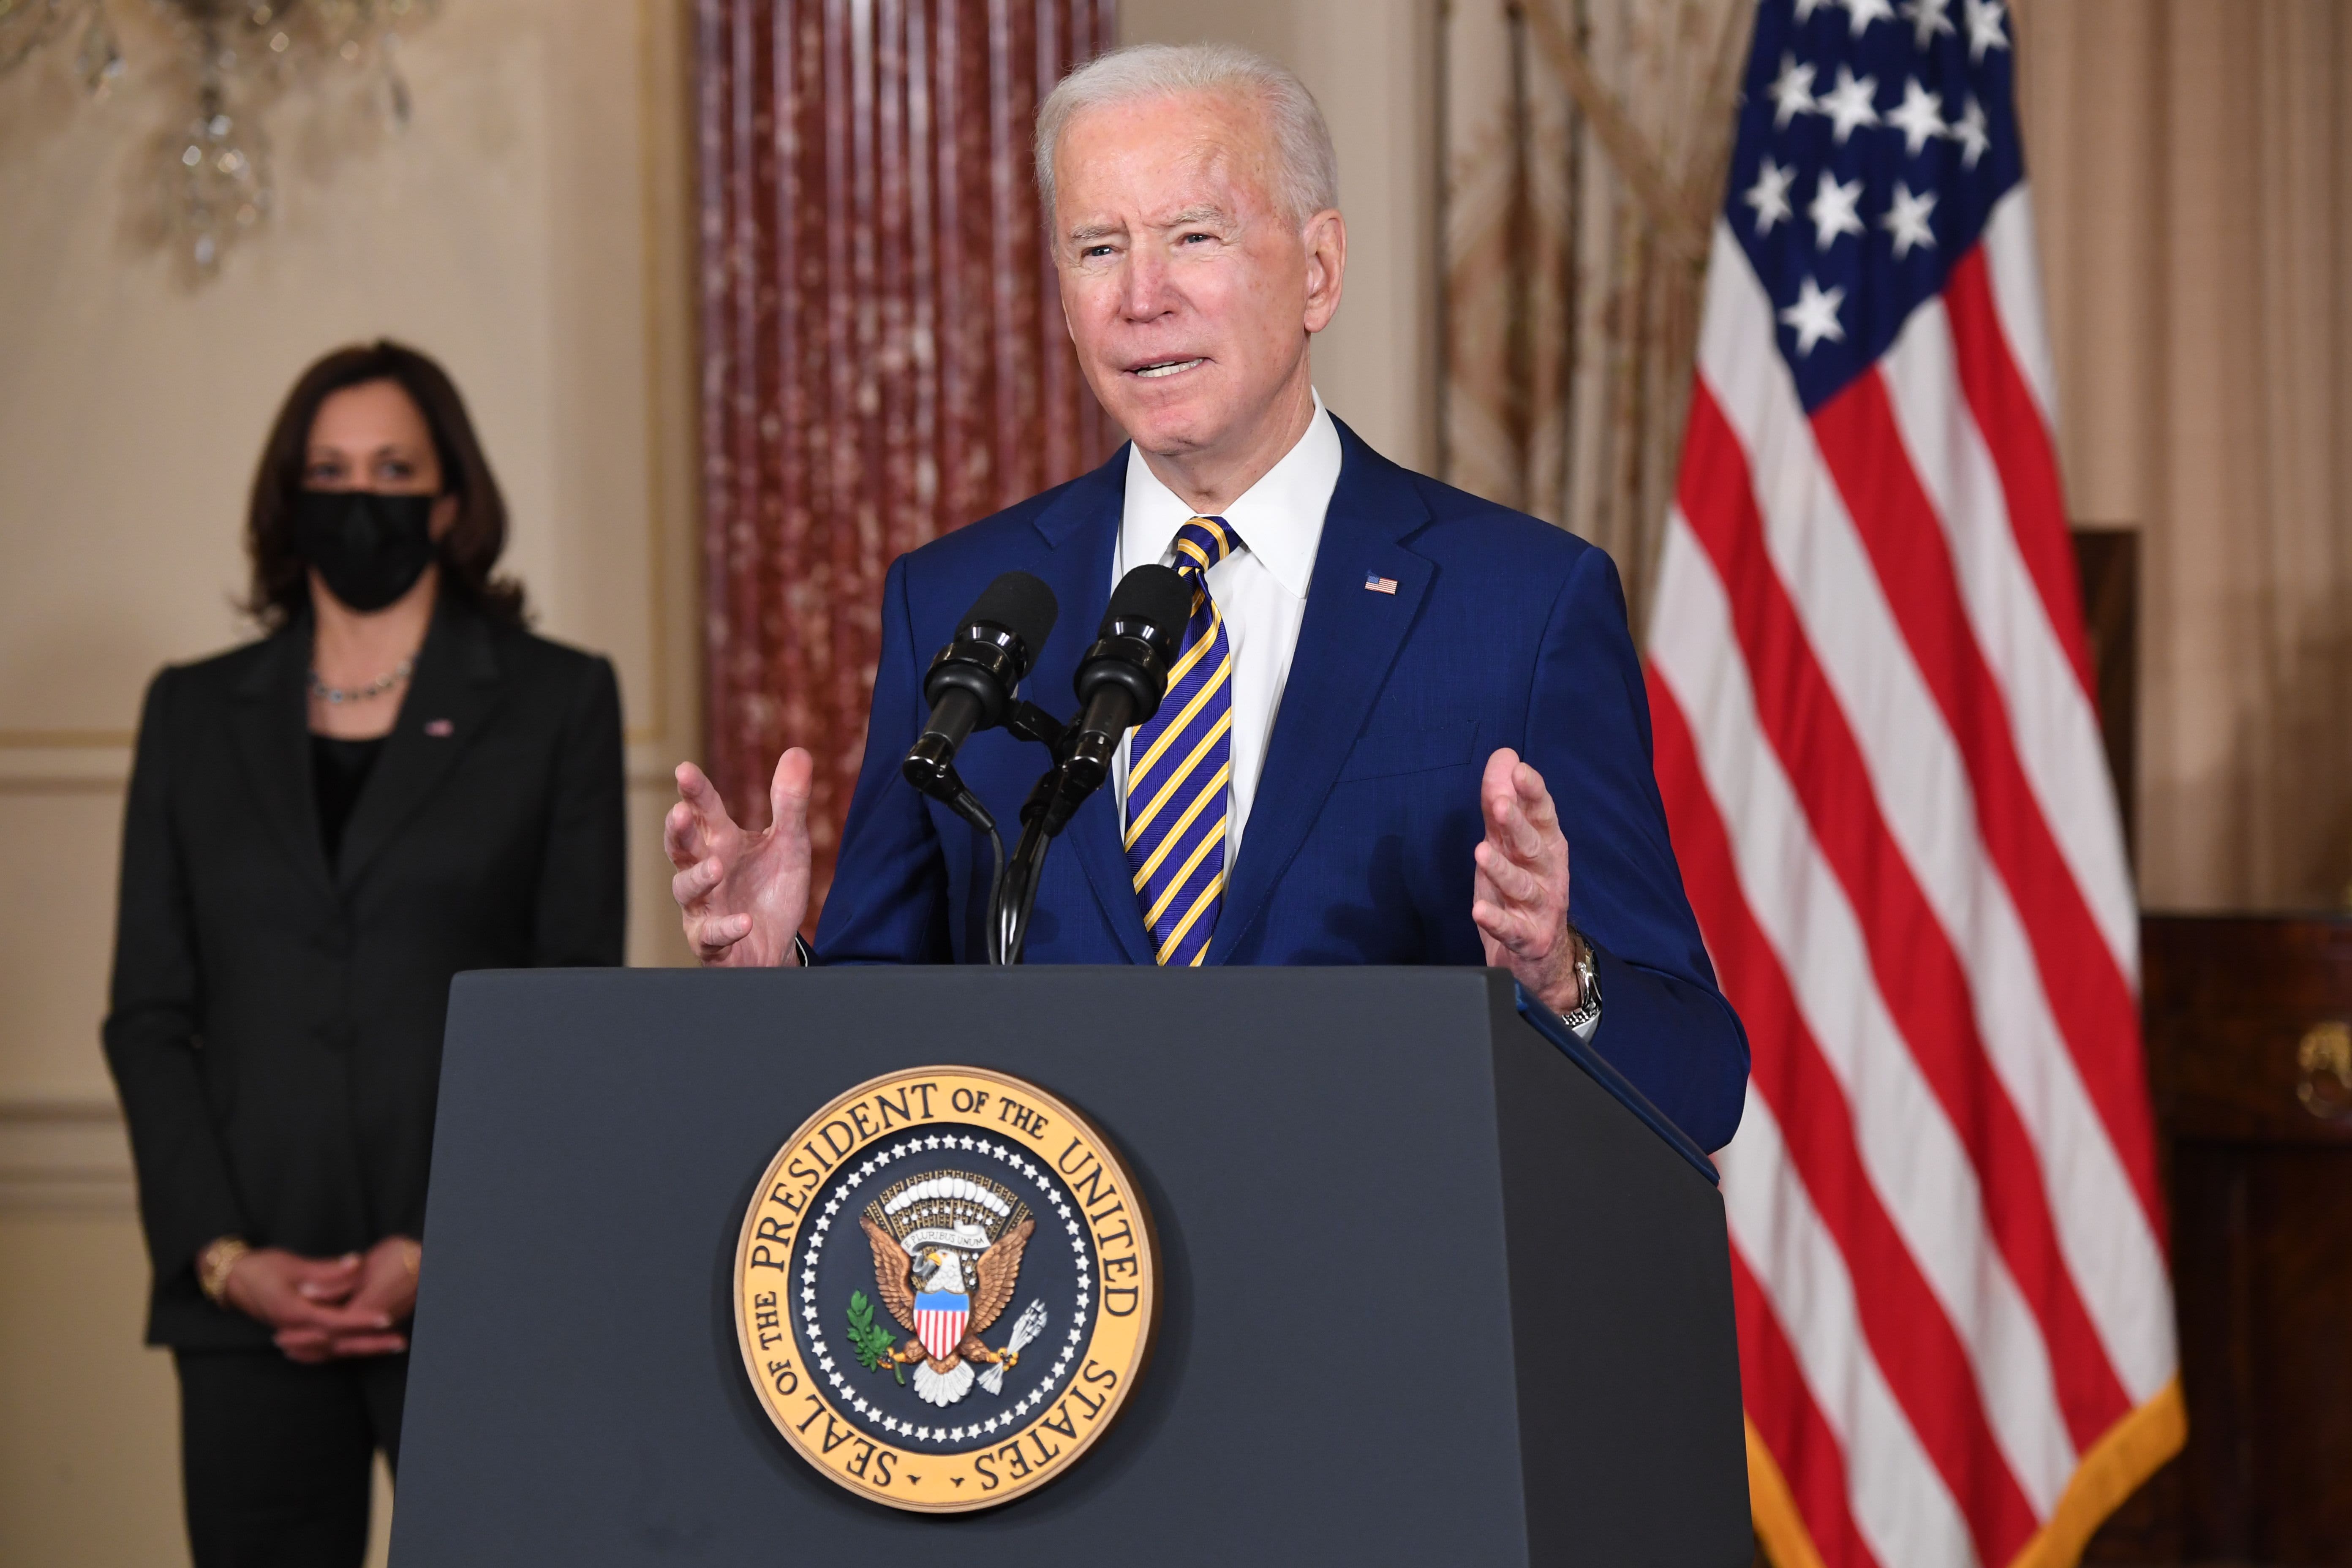 Biden says the US will not hesitate to increase costs for Russia